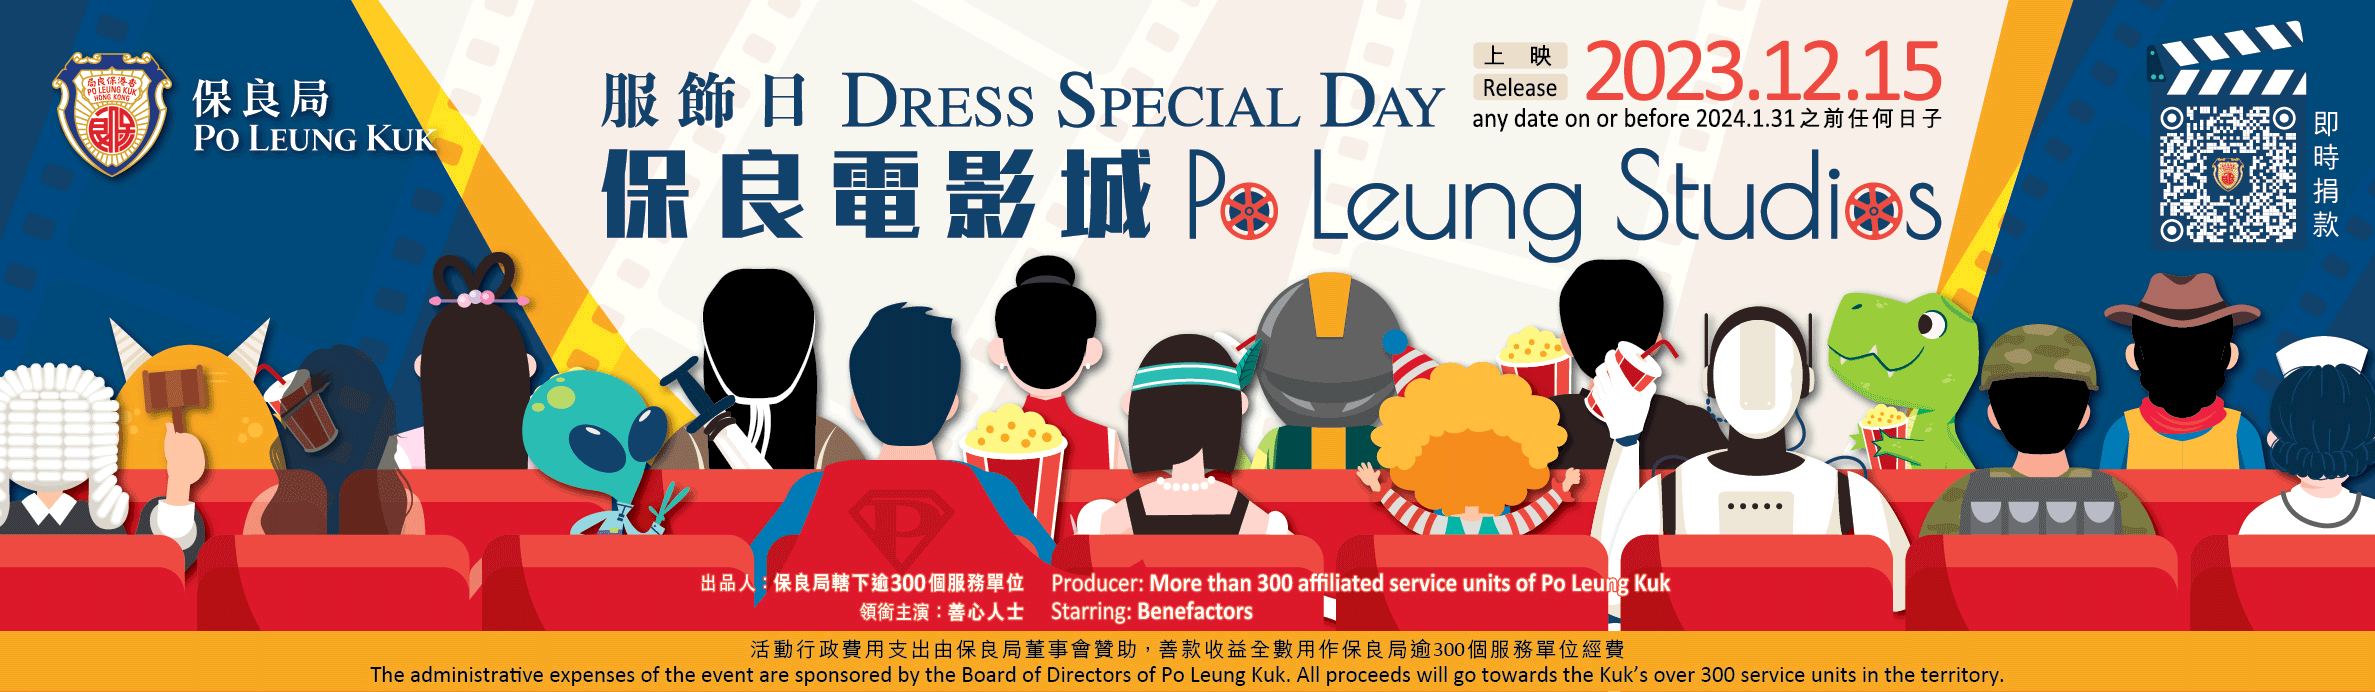 Dress Special Day